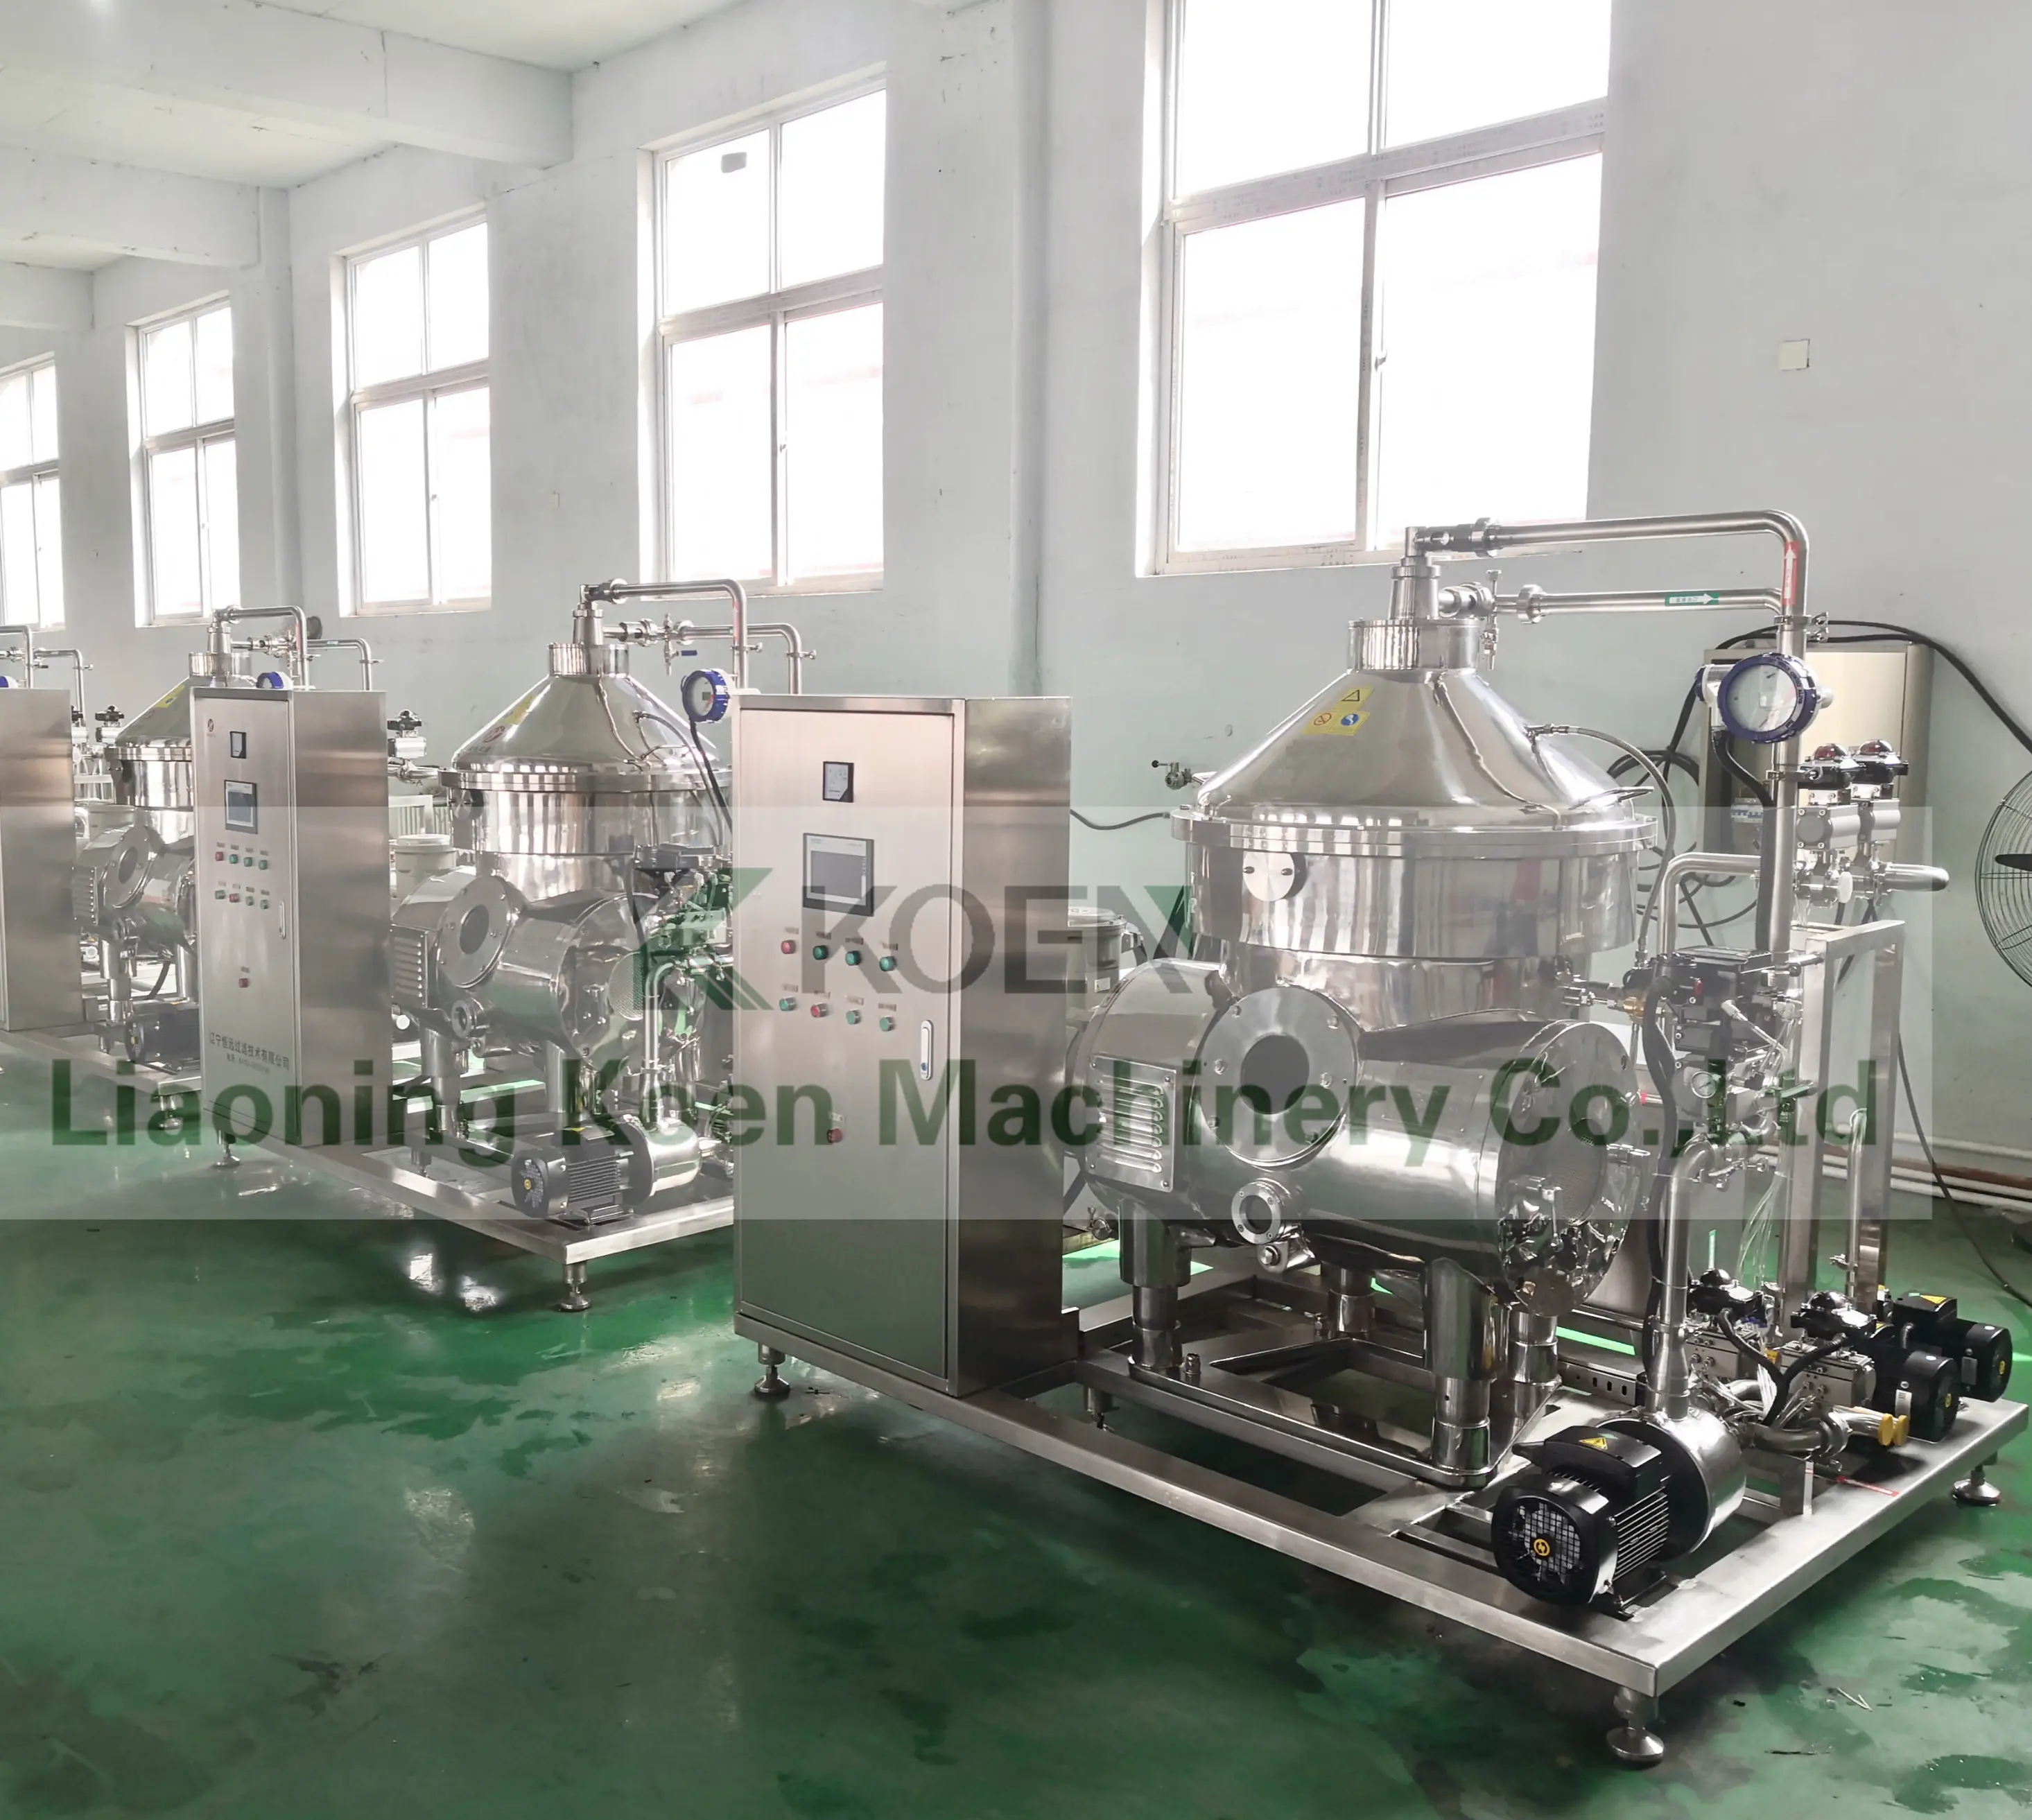 Factory direct disc stack centrifuge for Bacillus E.coli Yeast Bacteria fermentation broth With Trade Assurance